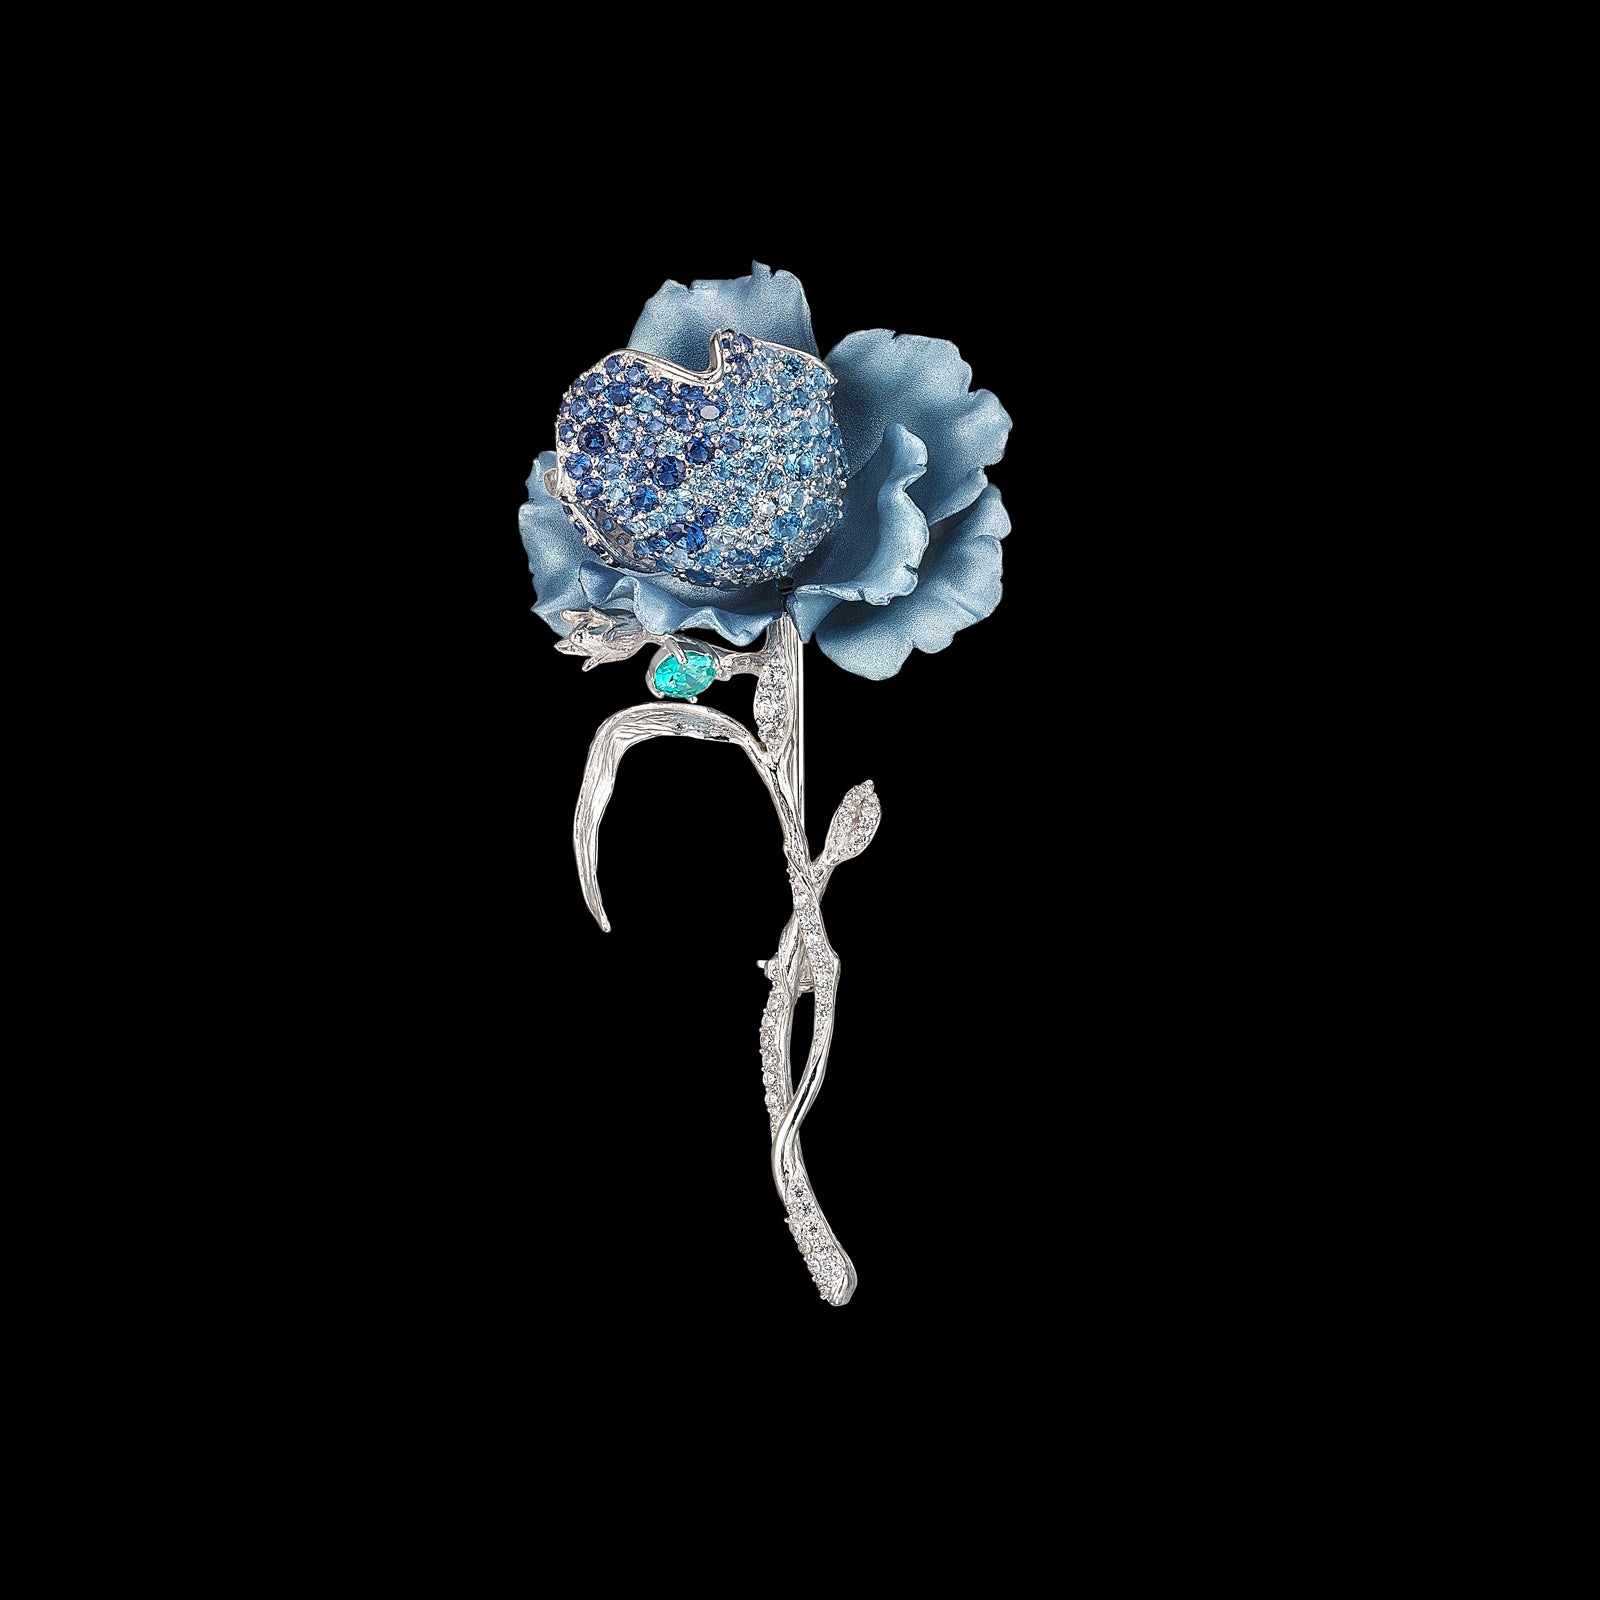 Paraiba Parrot Tulip Brooch, Brooch, Anabela Chan Joaillerie - Fine jewelry with laboratory grown and created gemstones hand-crafted in the United Kingdom. Anabela Chan Joaillerie is the first fine jewellery brand in the world to champion laboratory-grown and created gemstones with high jewellery design, artisanal craftsmanship and a focus on ethical and sustainable innovations.